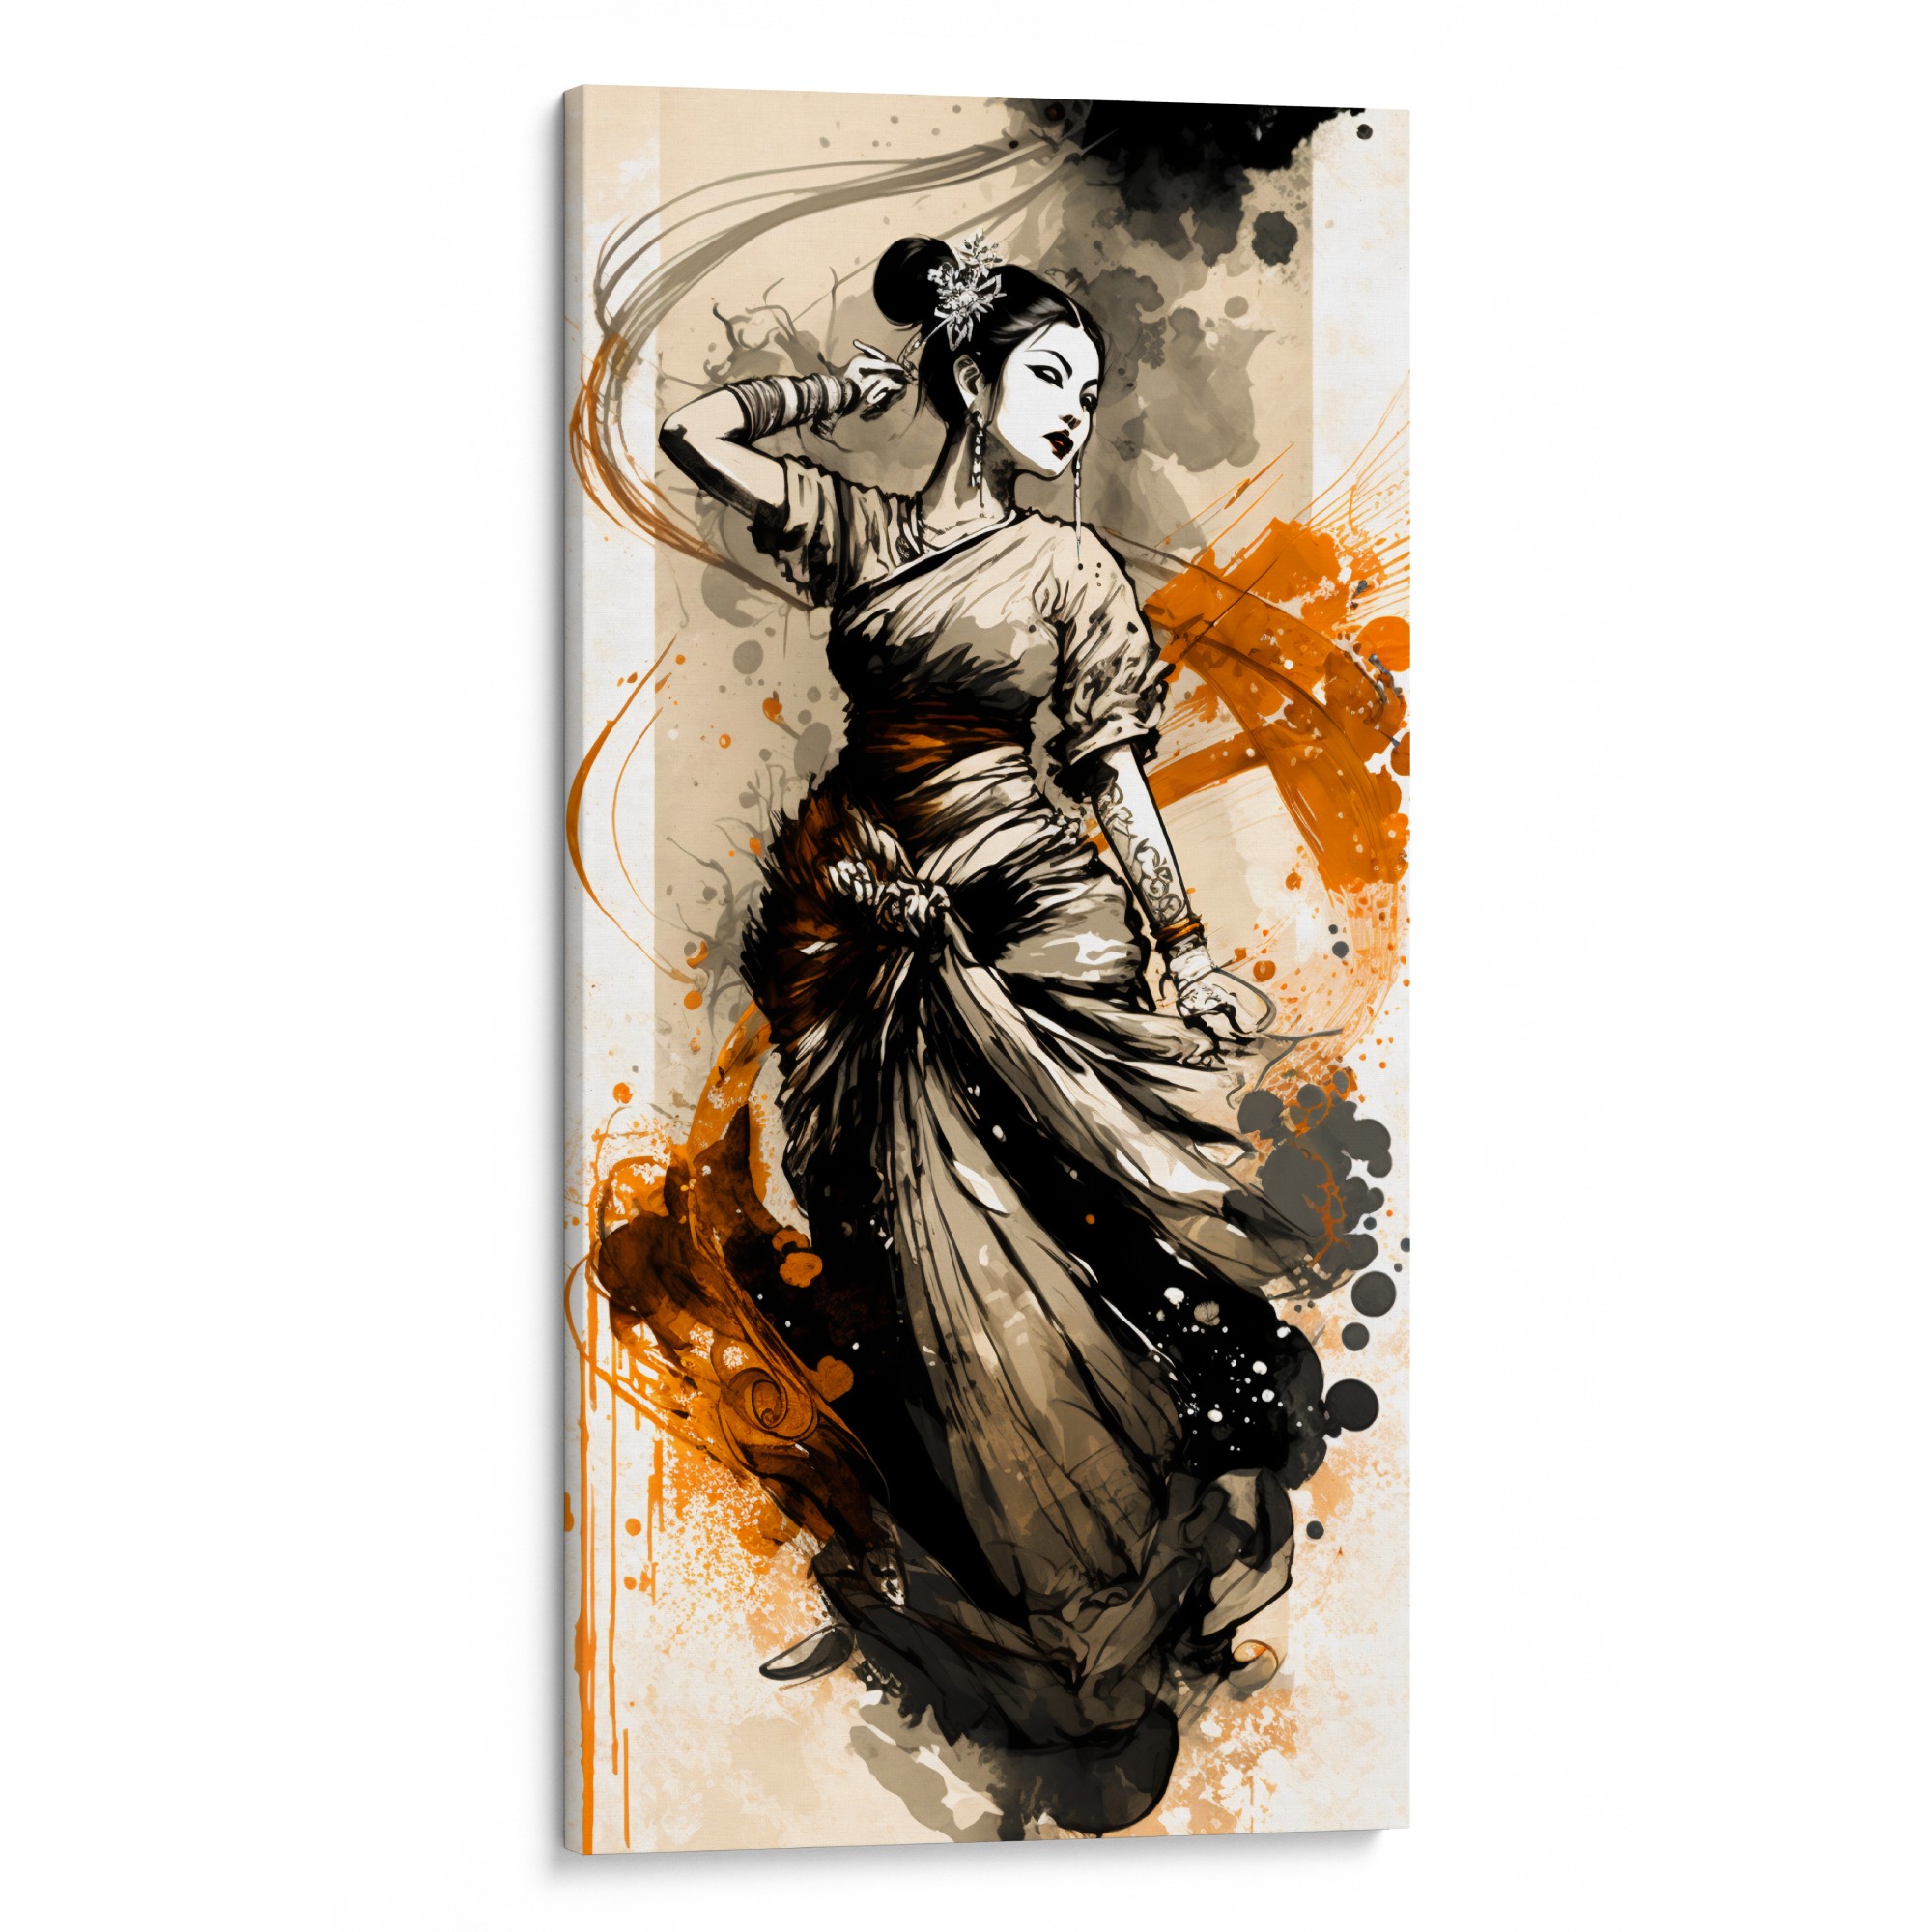 CHAIYADEE Exclusive Canvas - A world where dance and reflection intertwine, available only at Koh Chang Art Studio.